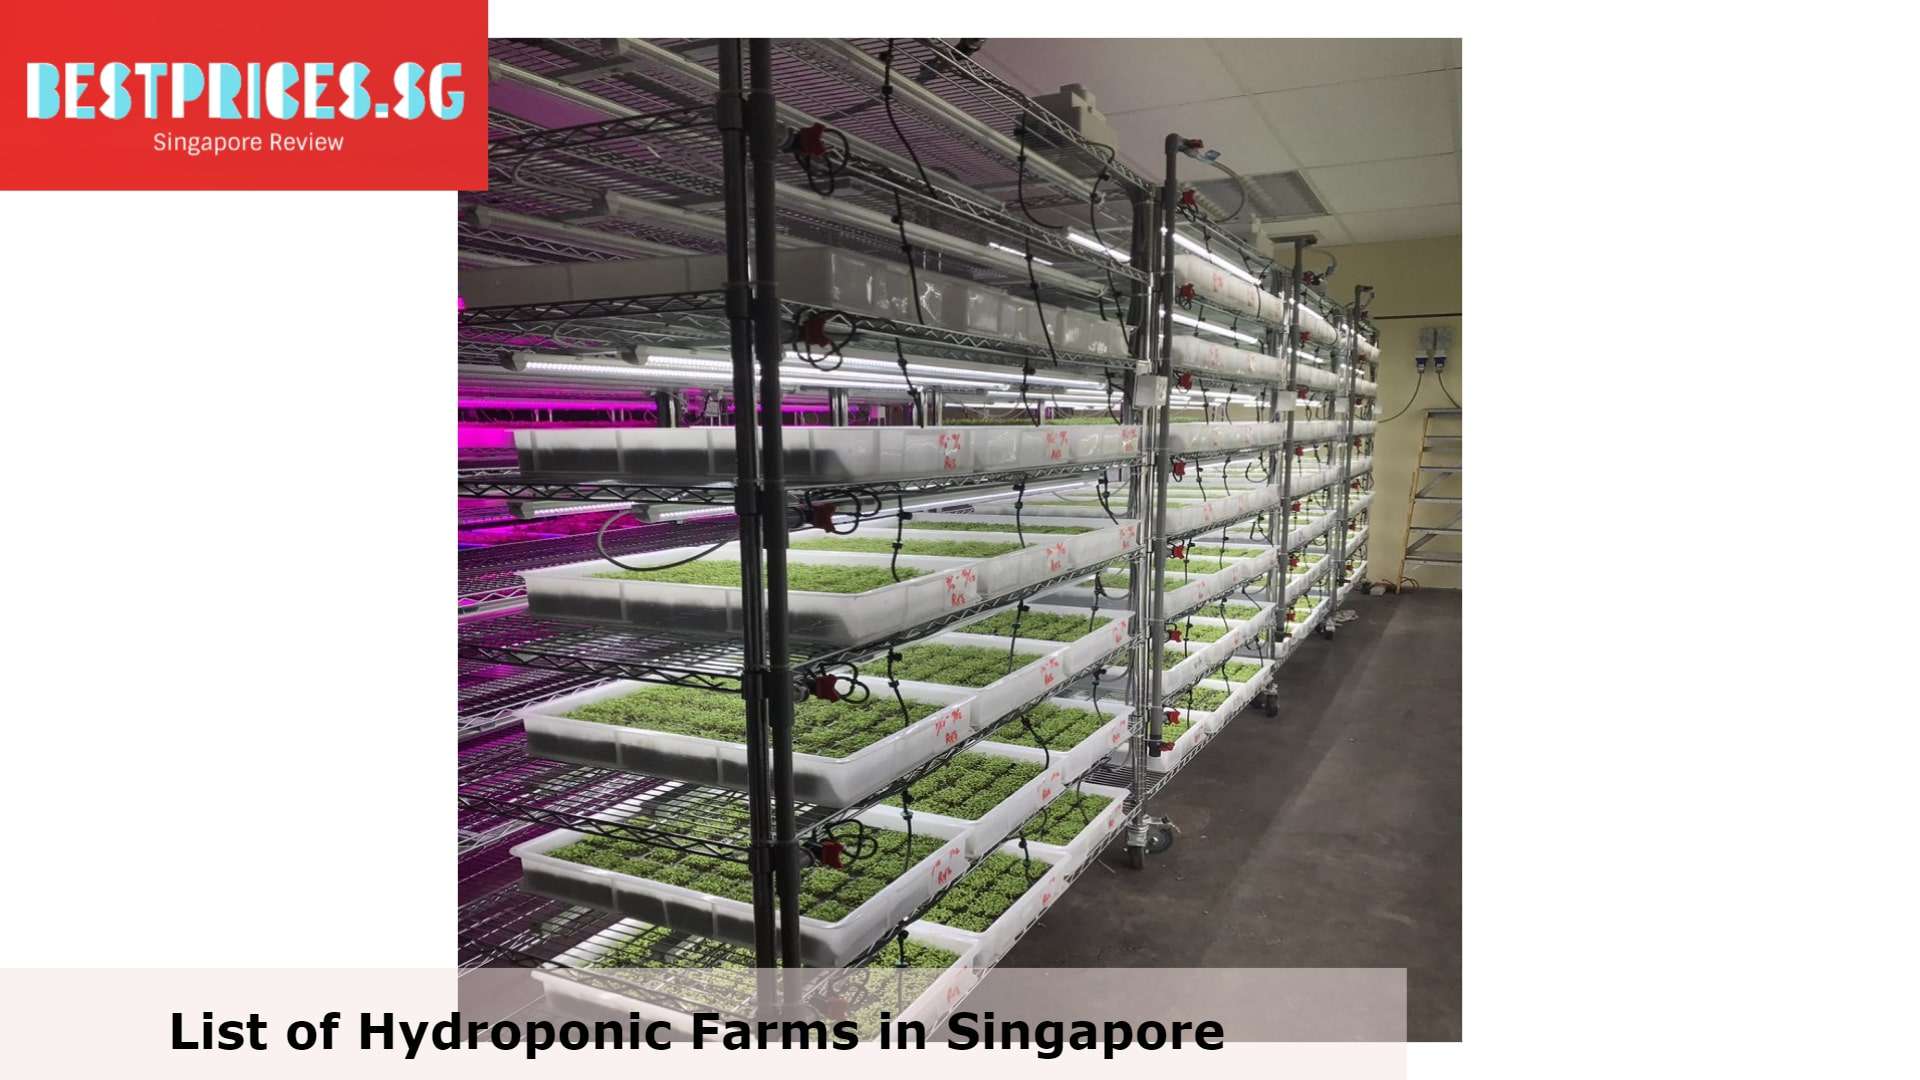 Smart Agro - Hydroponic Farm Singapore, Hydroponics Singapore hdb, Hydroponics system Singapore, Hydroponics Singapore farm, Hydroponics Singapore home, Hydroponics Equipment Suppliers Singapore, What can you grow in hydroponics Singapore?, How much does it cost for a hydroponic setup?, Is a hydroponic system worth it?, Hydroponics Kits, Hydroponics Indoors, Vertical Hydroponic System, best indoor garden Singapore, Which indoor plants are suitable for hydroponics?, 